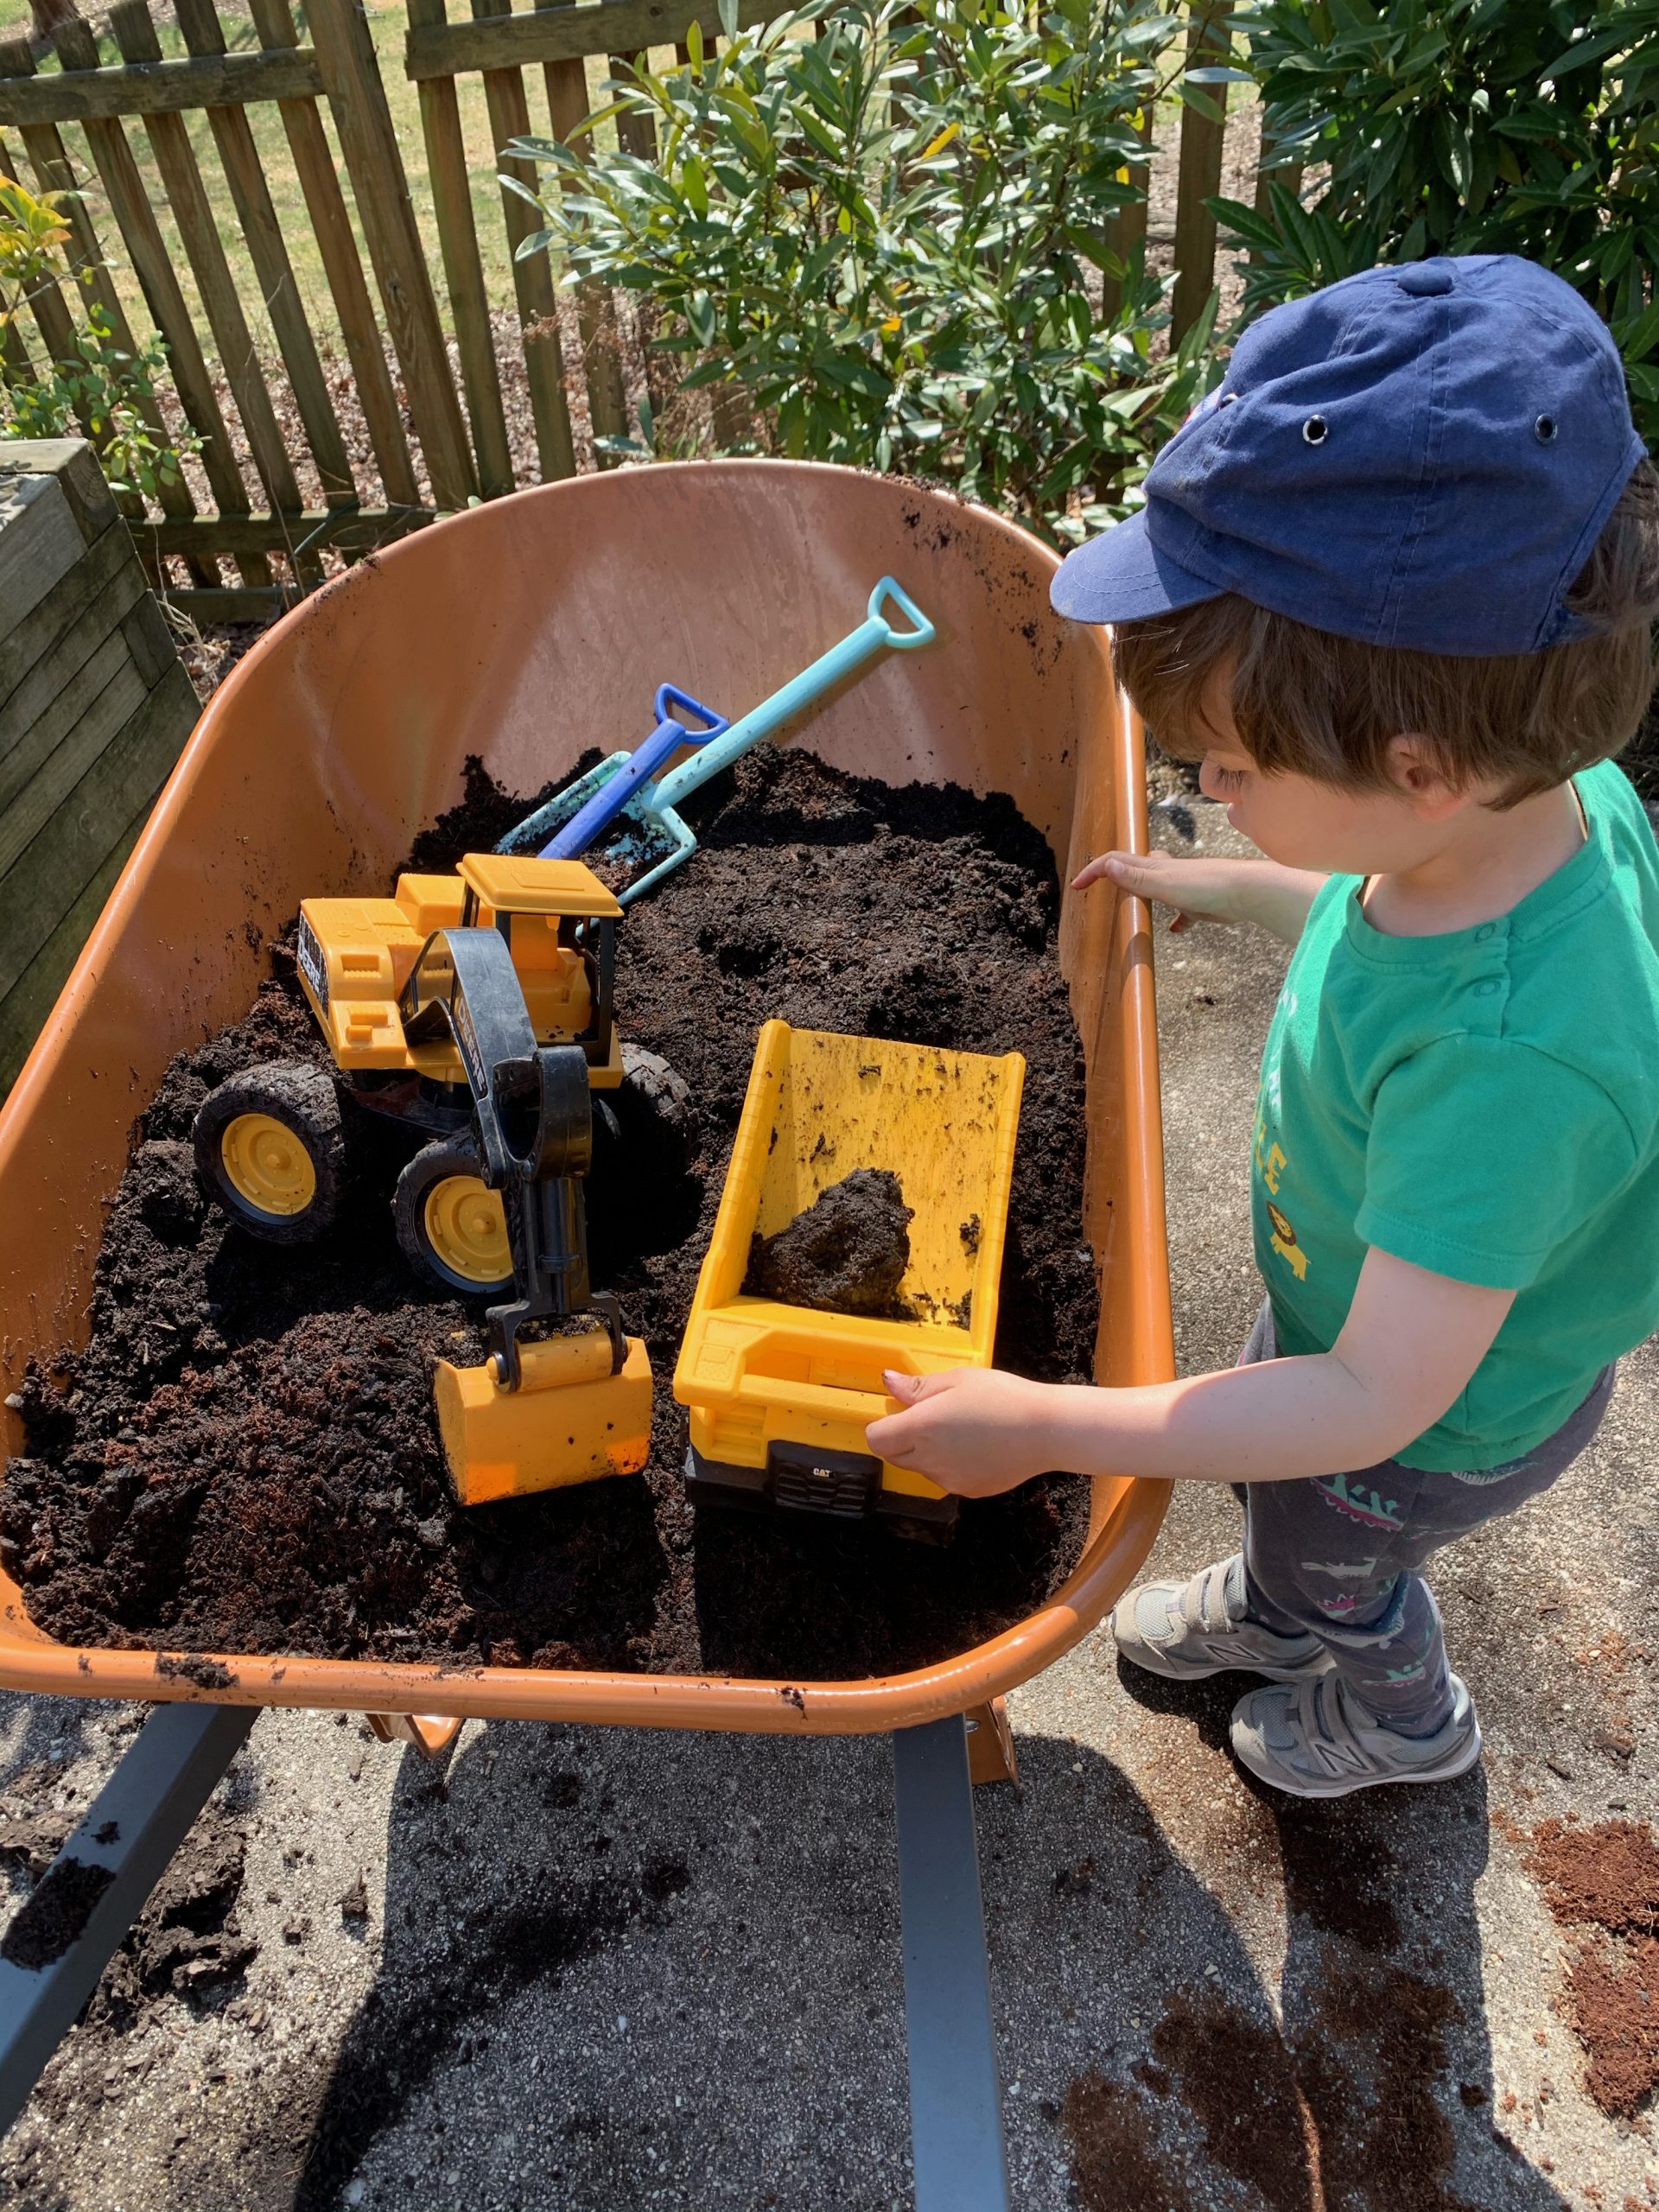 A young boy looks at his toys in a wheelbarrow full of dirt.